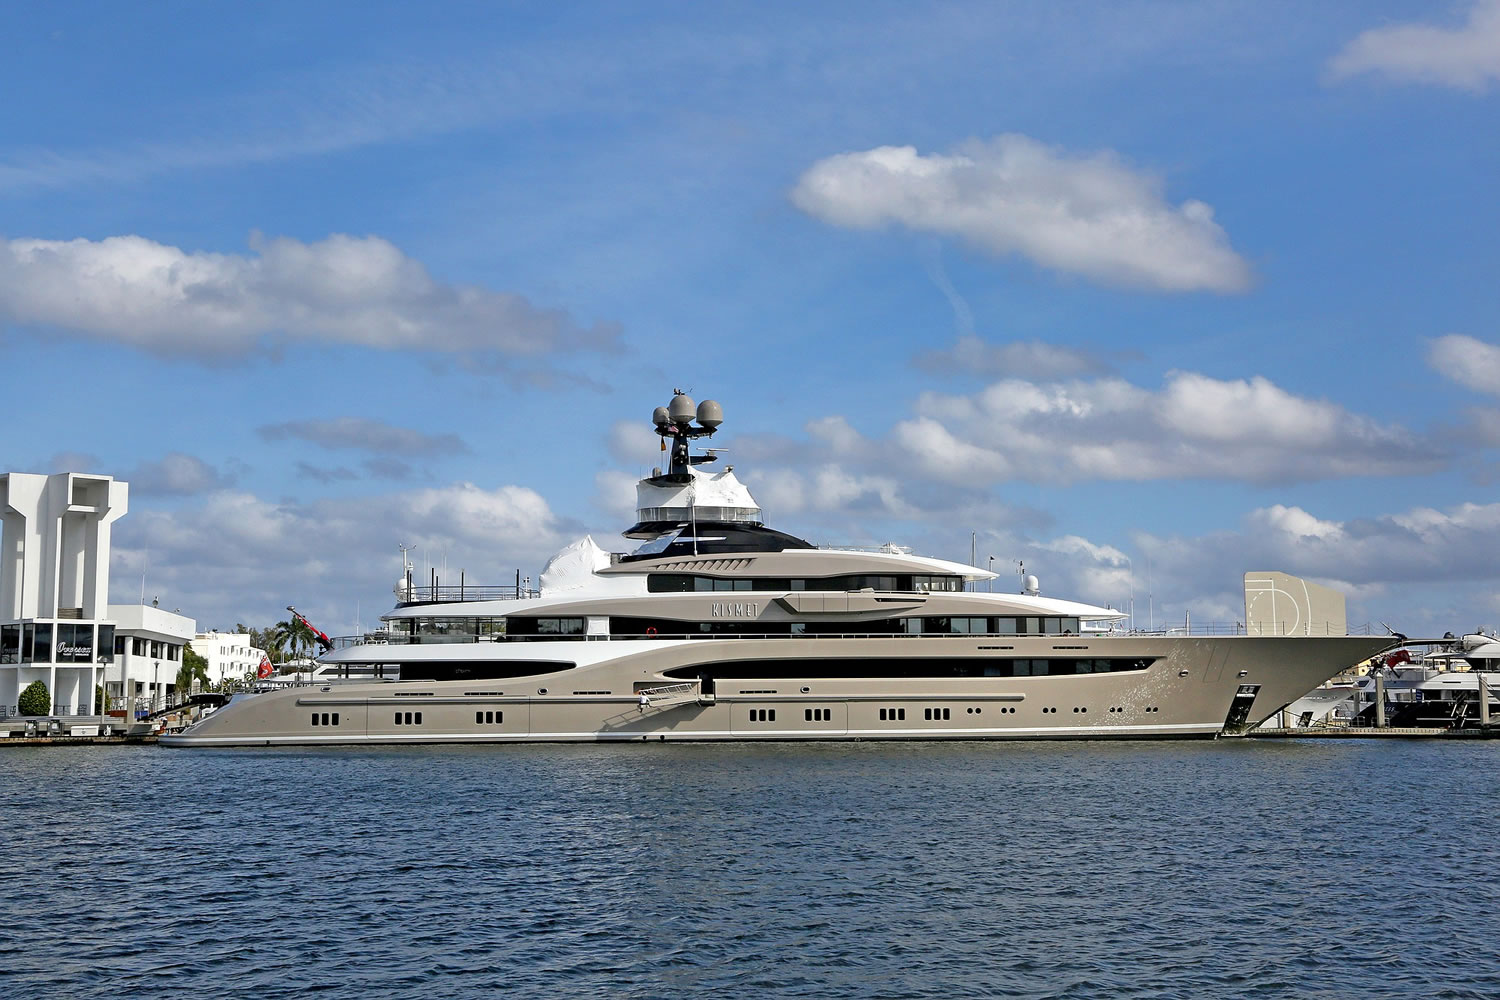 It's the largest yacht ever to dock at Fort Lauderdale's iconic Bahia Mar marina: a 312-footer named Kismet associated with Pakistani-American billionaire Shahid Khan, owner of the Jacksonville Jaguars professional football team.